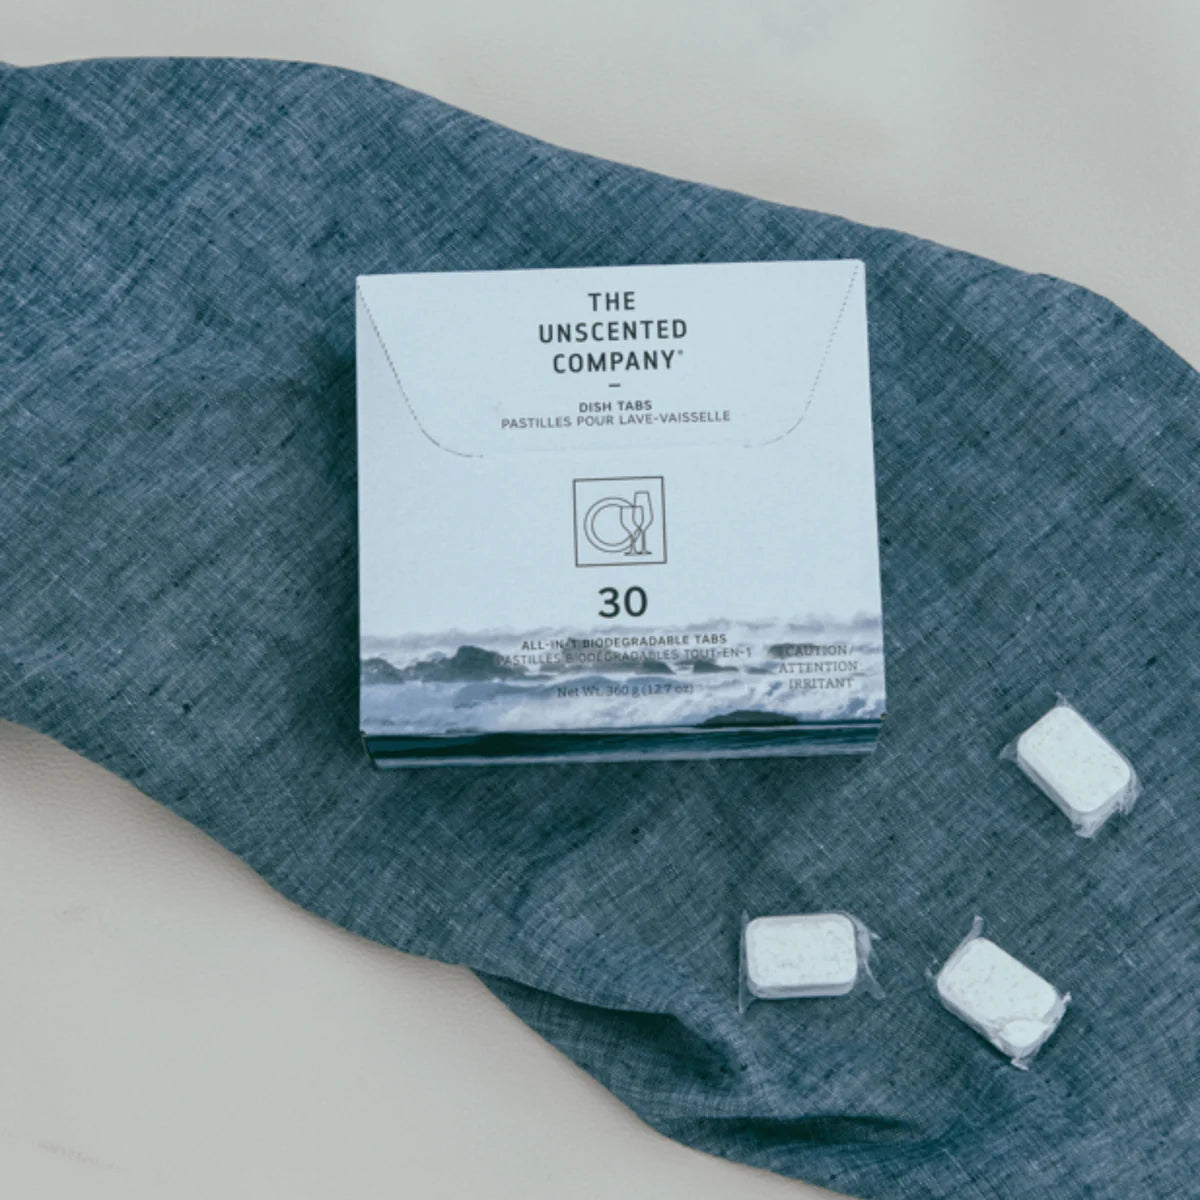 The Unscented Company - Eco-designed Dish Tabs - 30 tabs